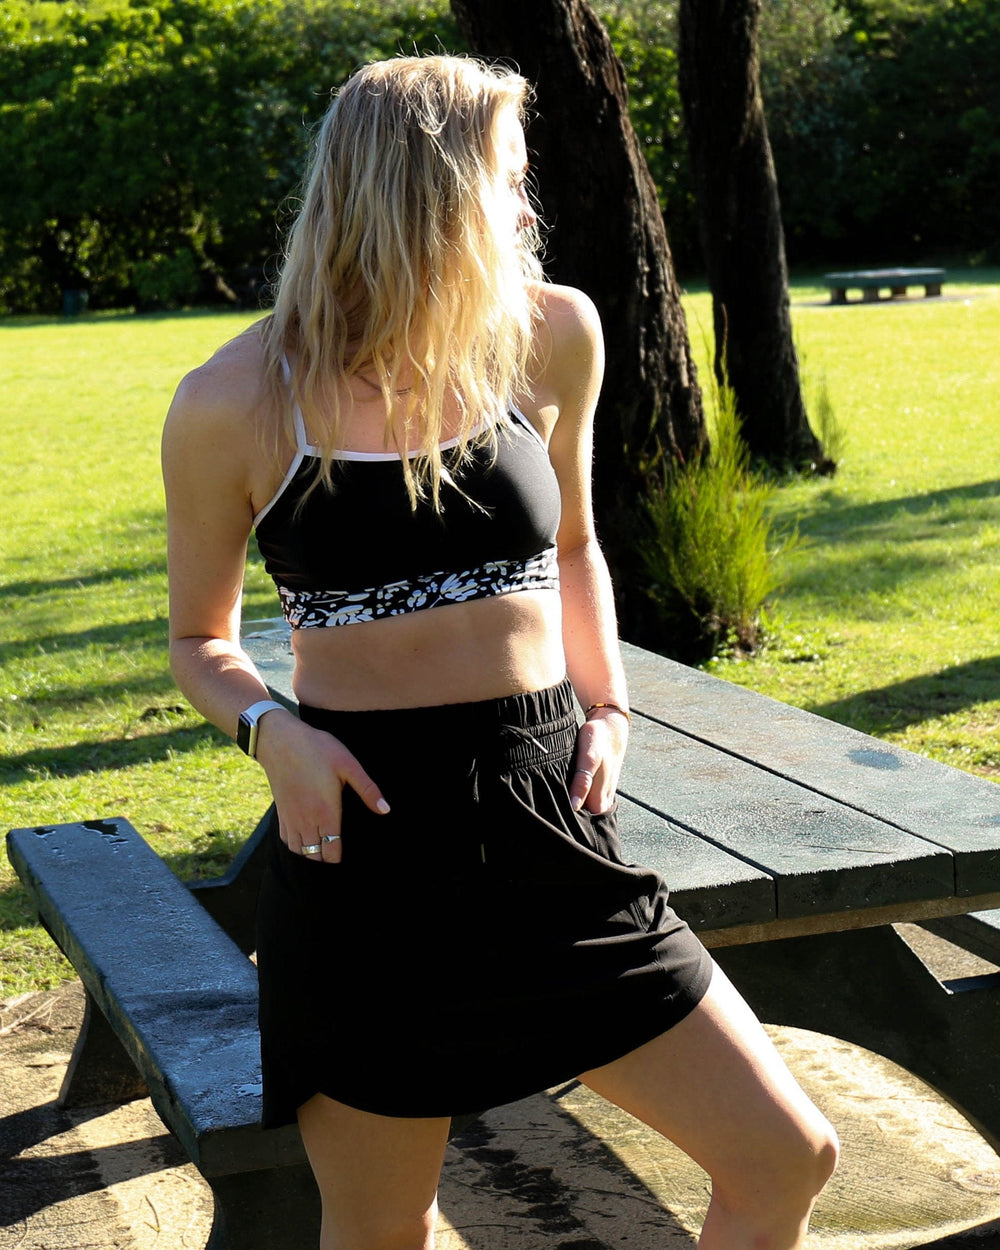 A women at a picnic table wearing a black athletic skirt.